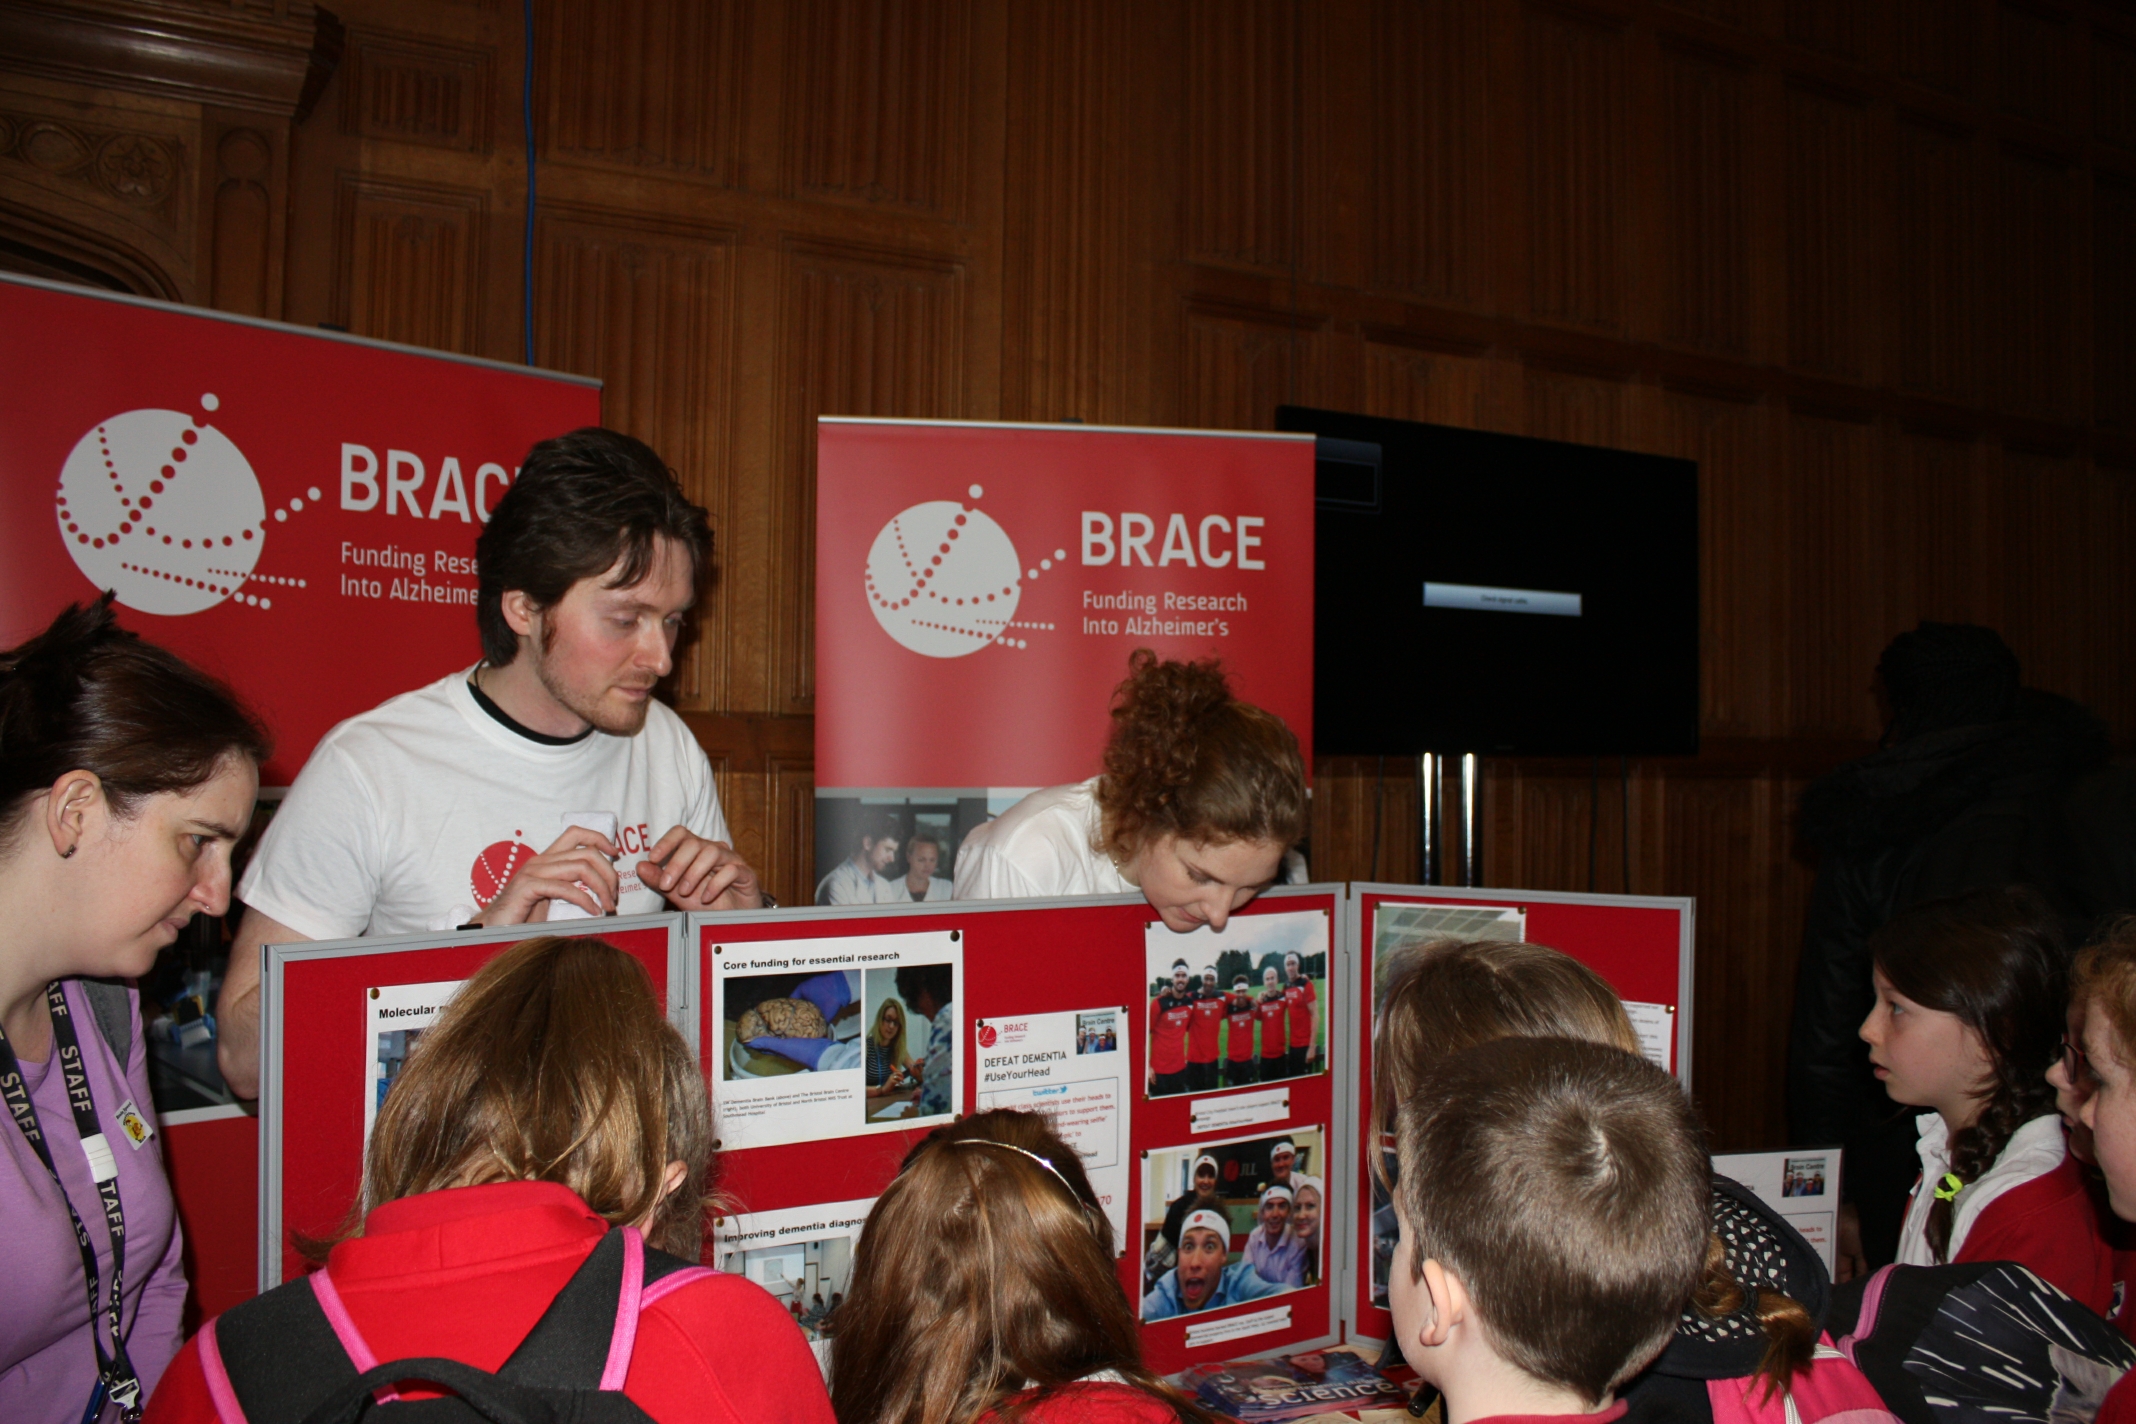 The BRACE exhibition stall